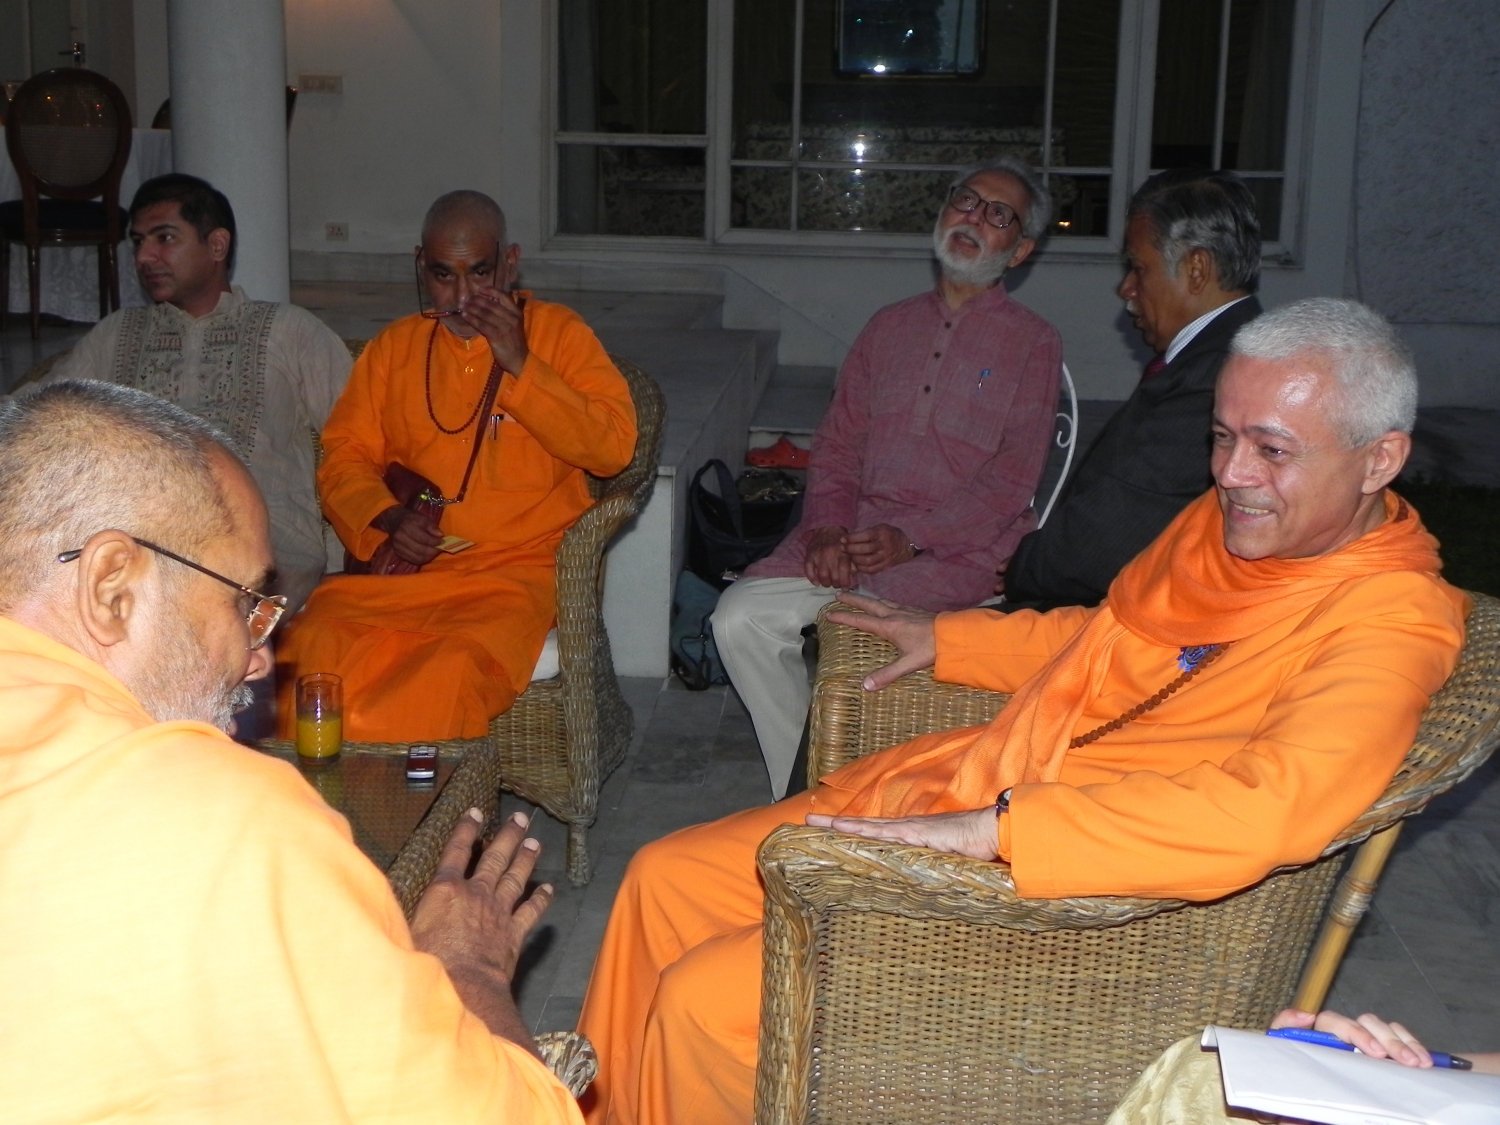 Reception of the Great Yoga Masters of India at the Embassy of Portugal - Dillí, India - 2011, March